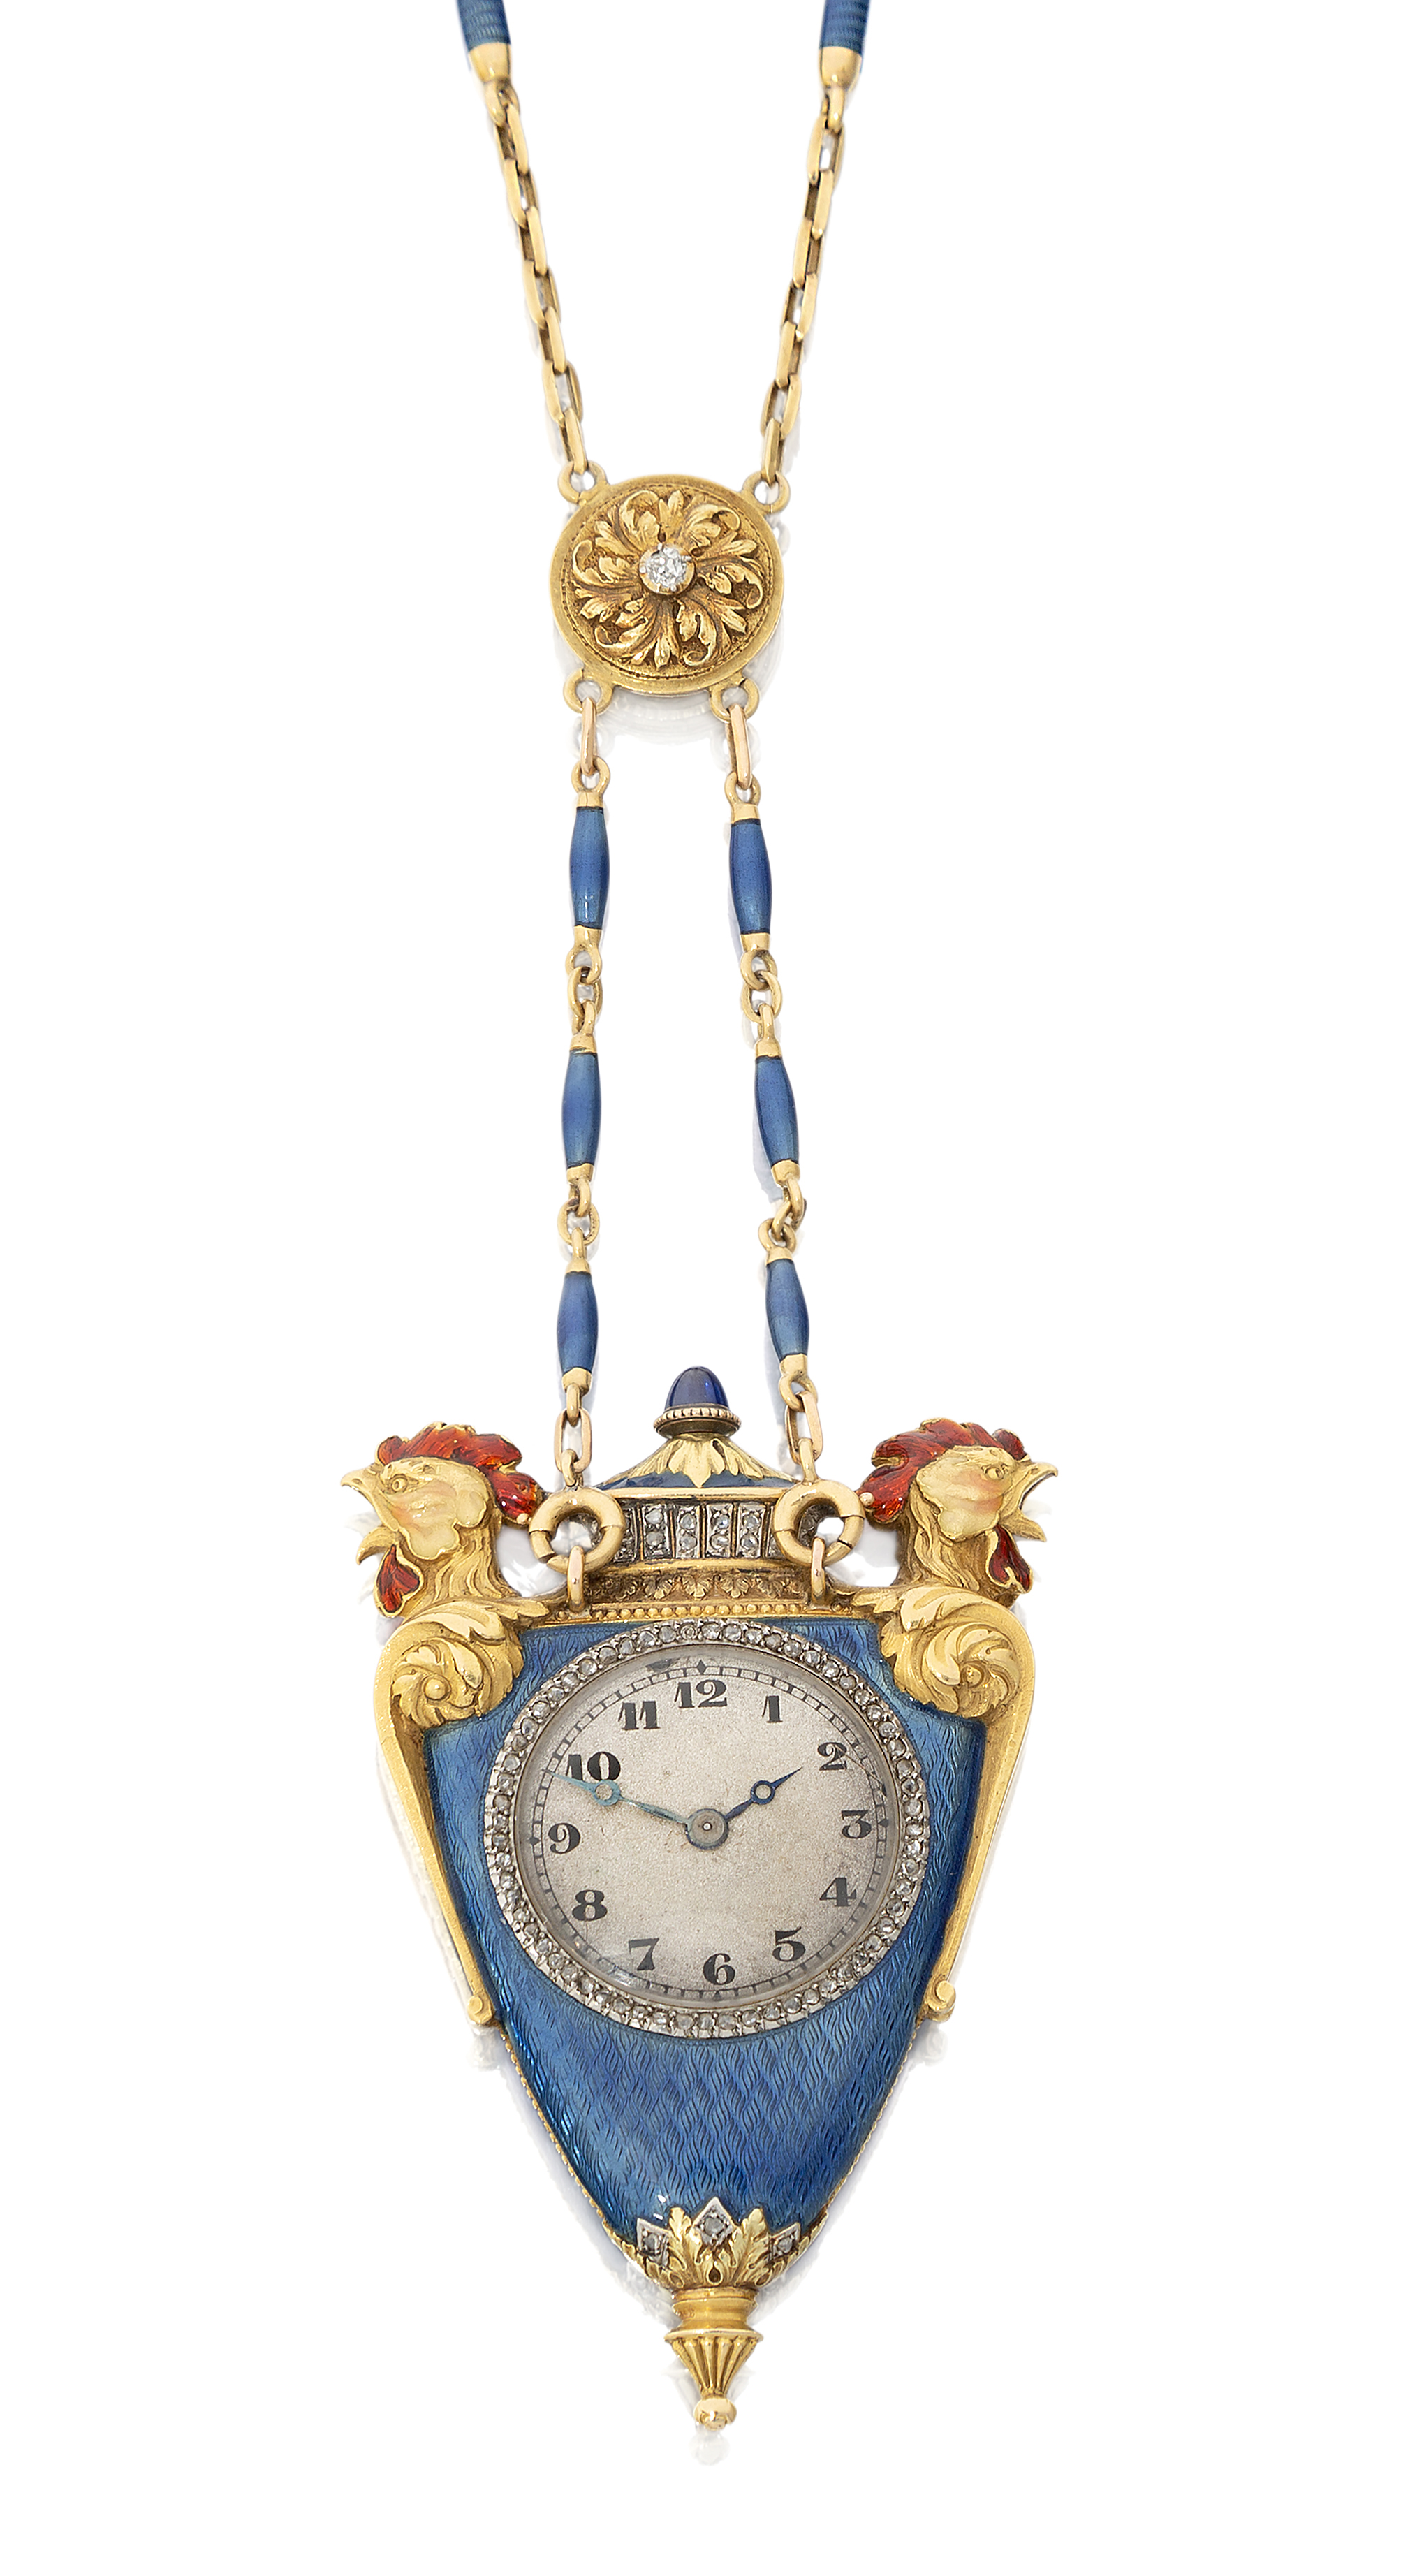 LeCoultre. A fine Belle Époque gold, diamond and enamel pendant watch and necklace, Nickel plated...